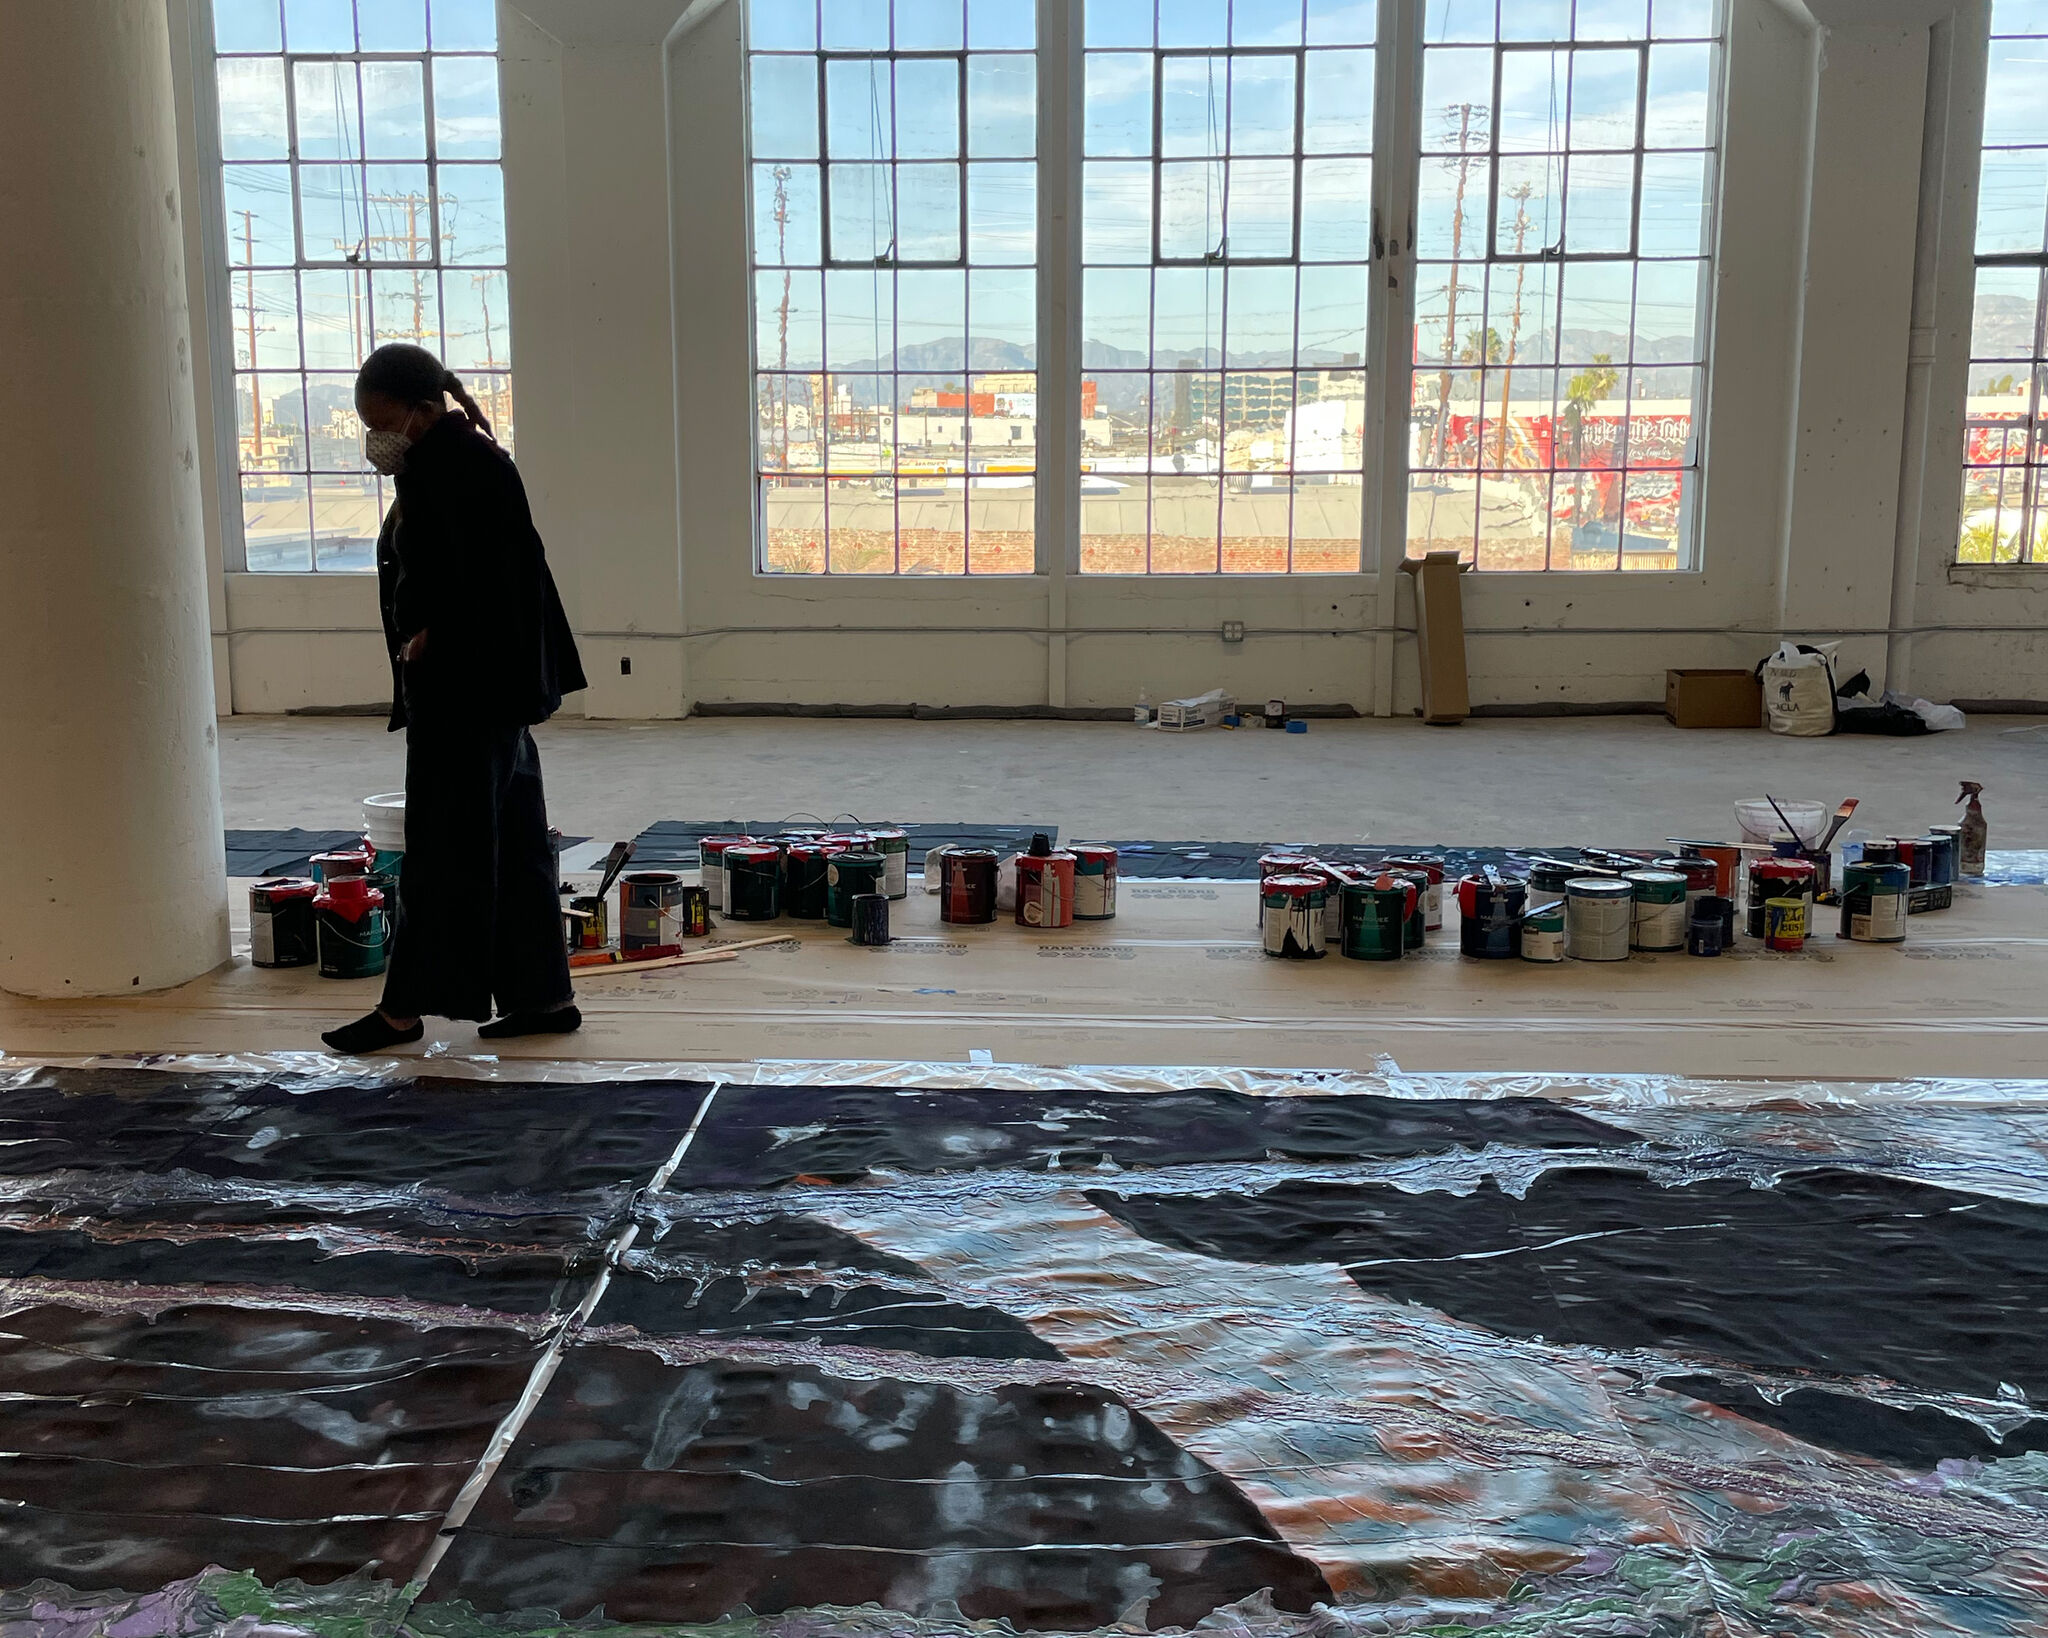 A woman stands surveying a large work of art that is laid out on the floor, in front of a bay of windows.